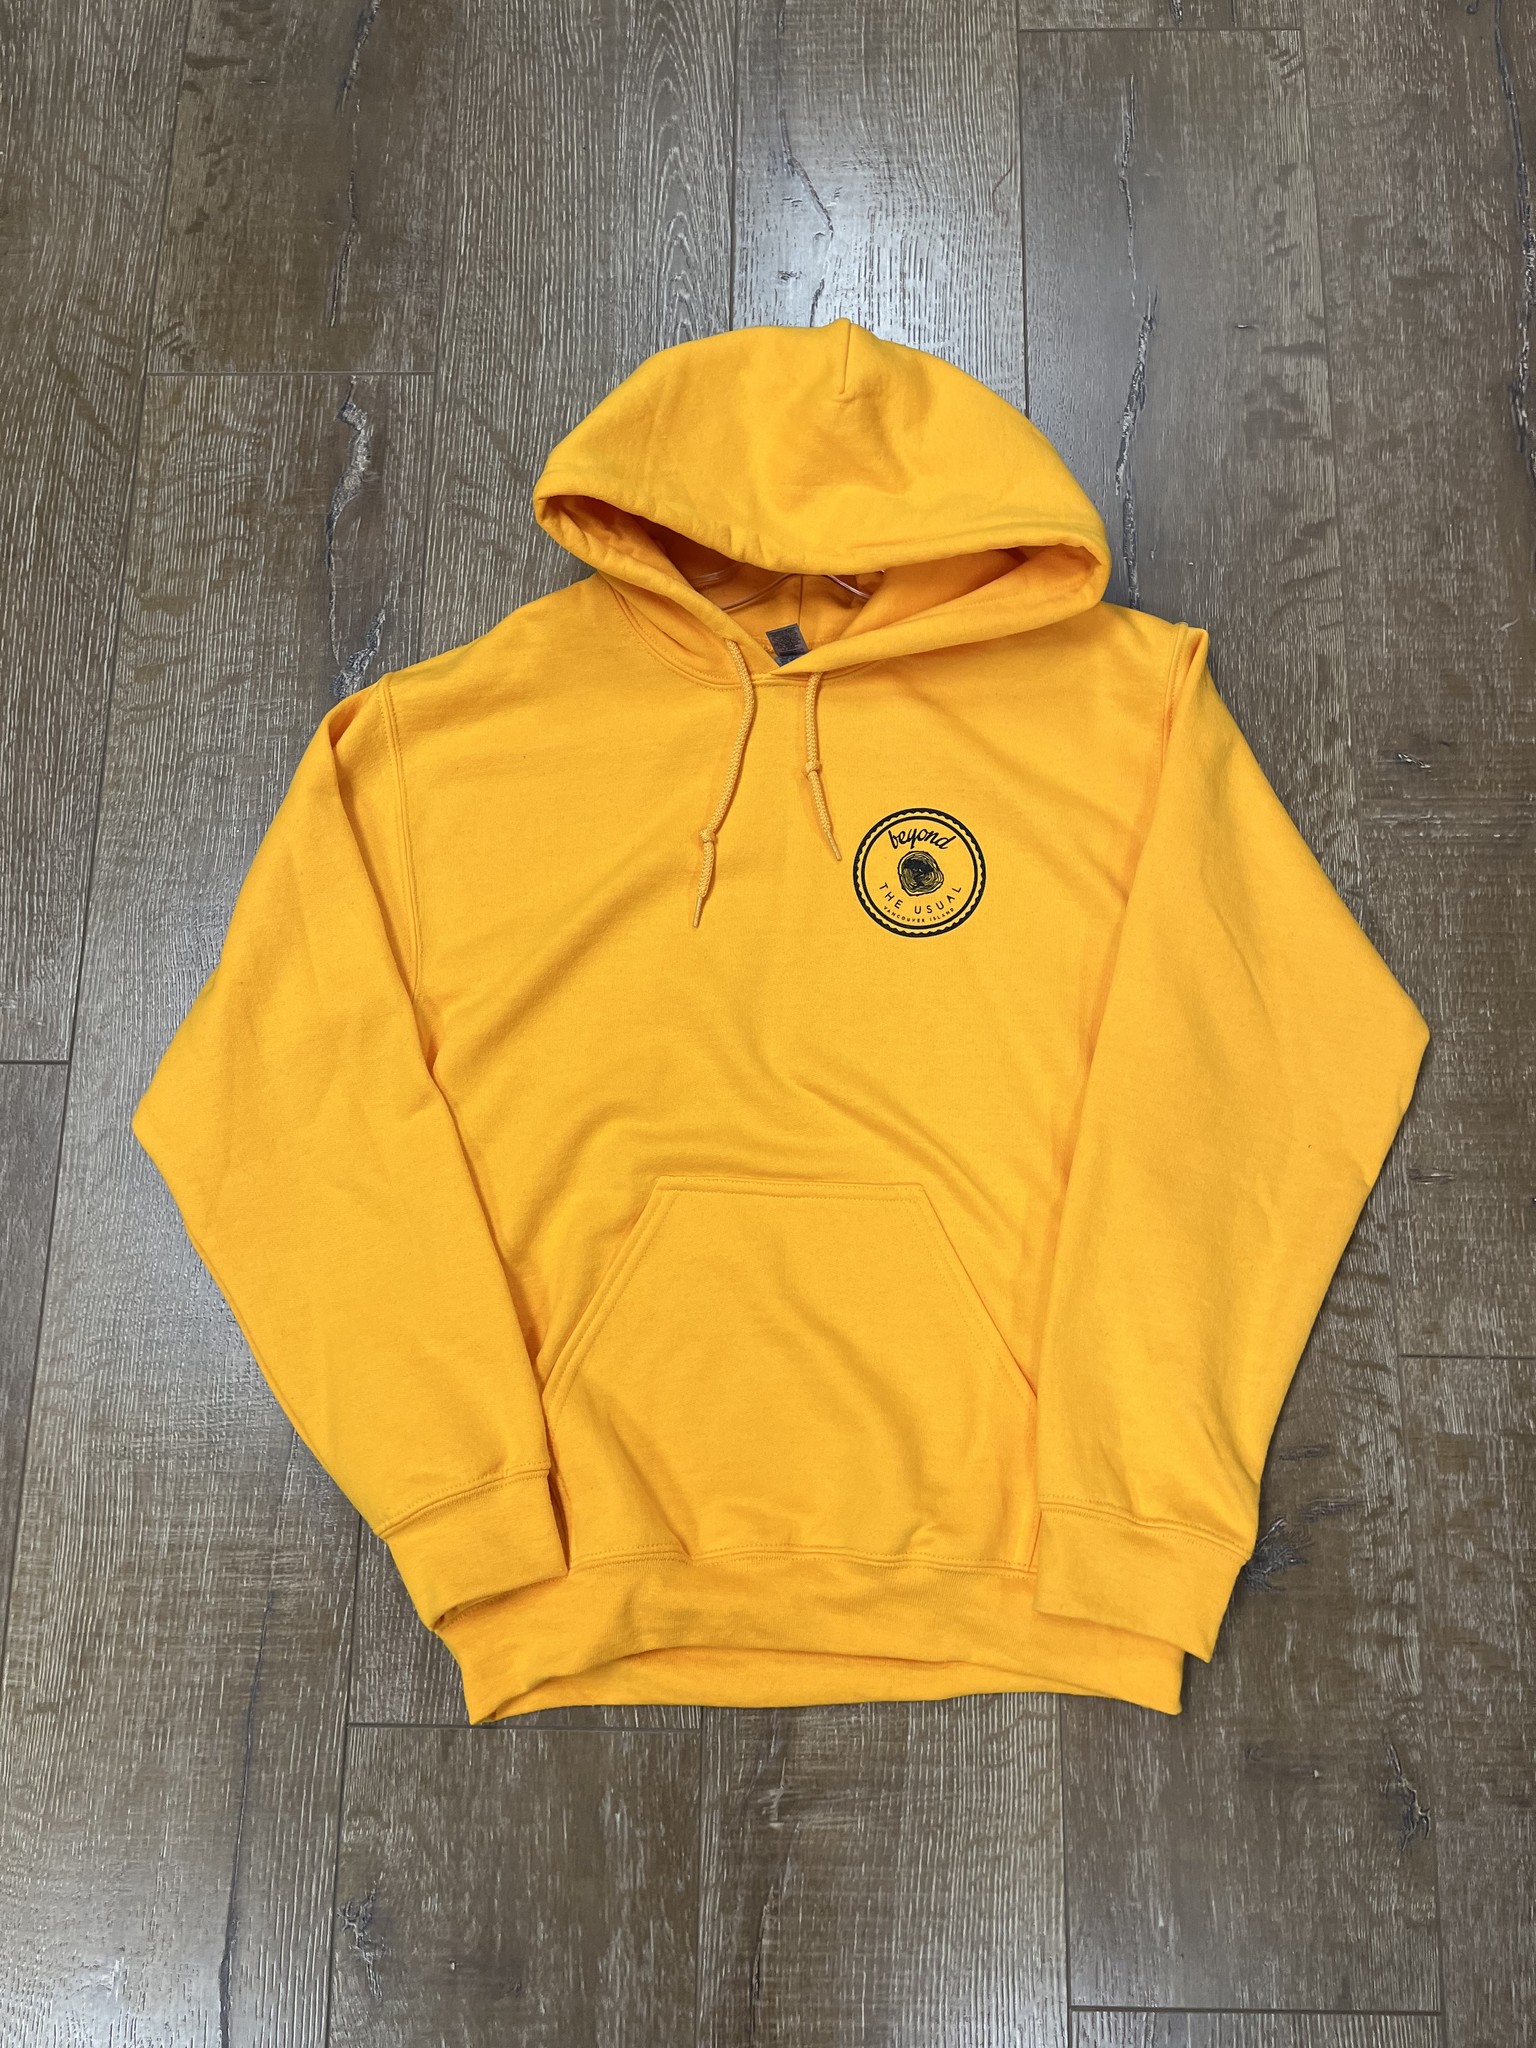 Beyond The Usual BTU Adult Icon/VI Map Hoodie - Gold